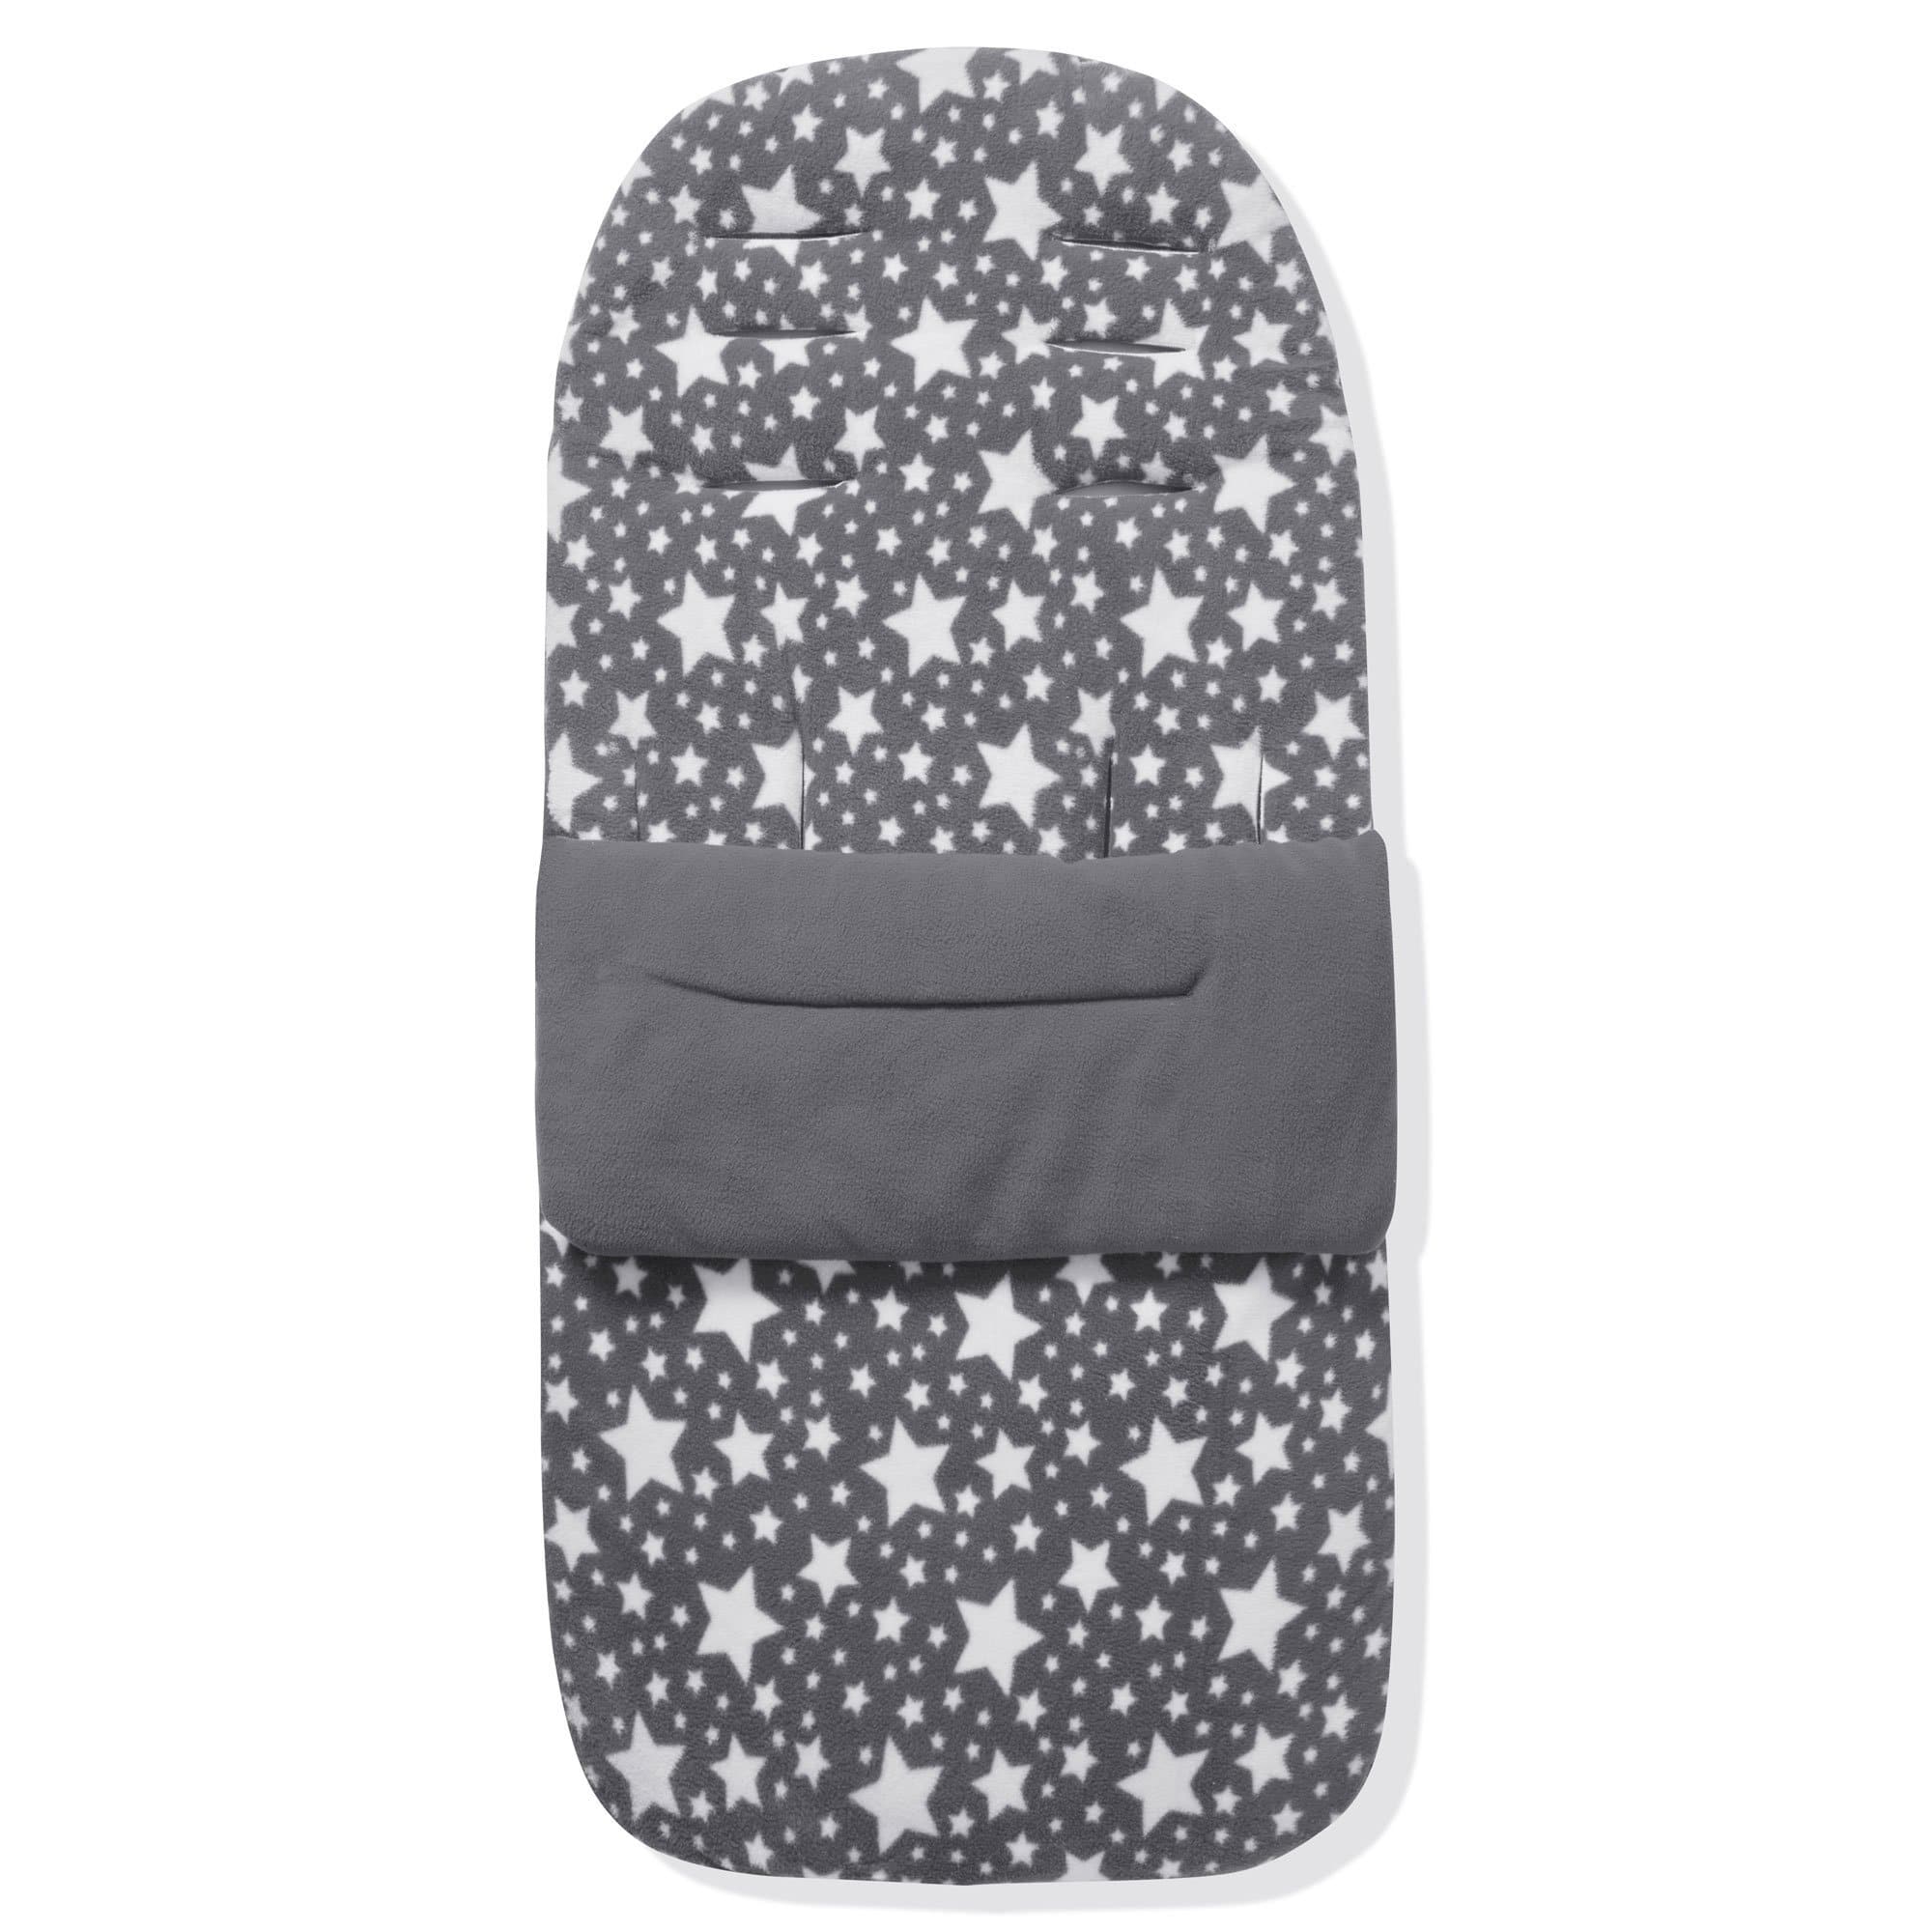 Fleece Footmuff / Cosy Toes Compatible with NeoNato - Grey Star / Fits All Models | For Your Little One